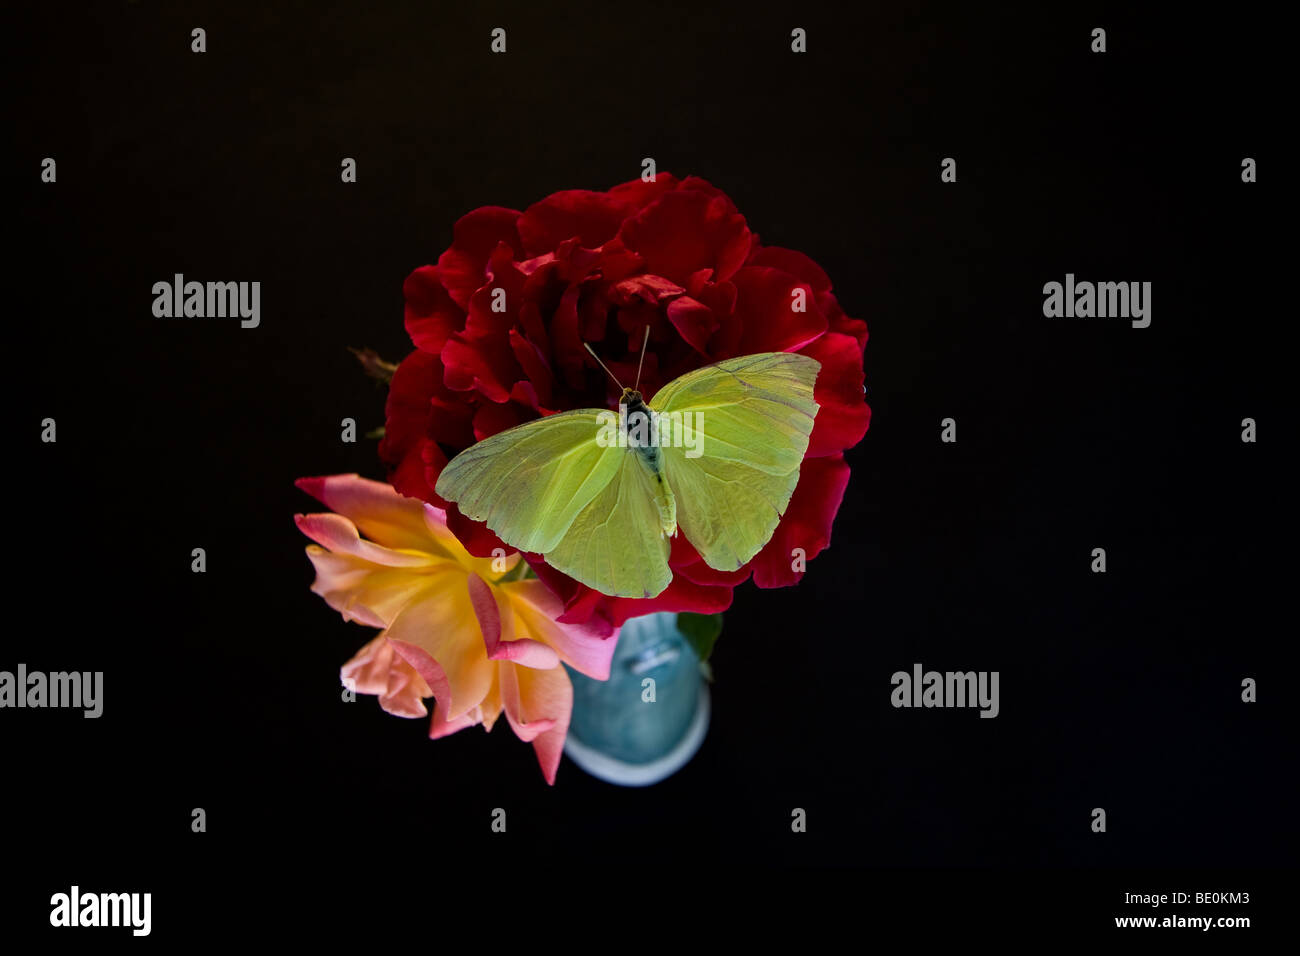 Varying flowers, roses and bay flowers make a picturesque scene with a black back drop. Stock Photo